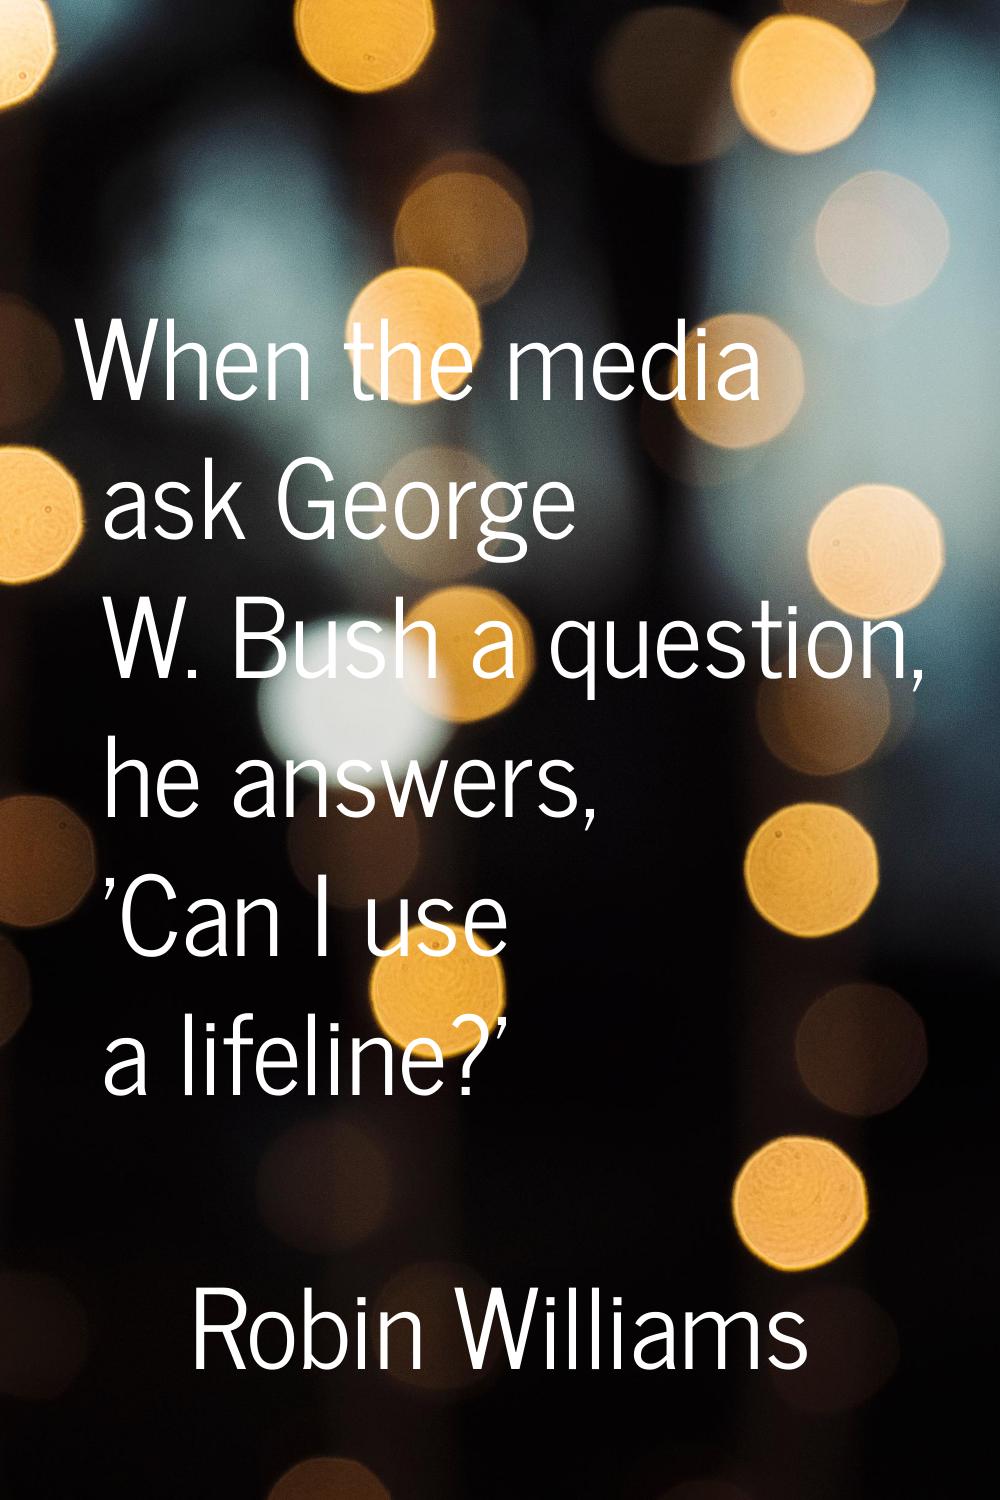 When the media ask George W. Bush a question, he answers, 'Can I use a lifeline?'